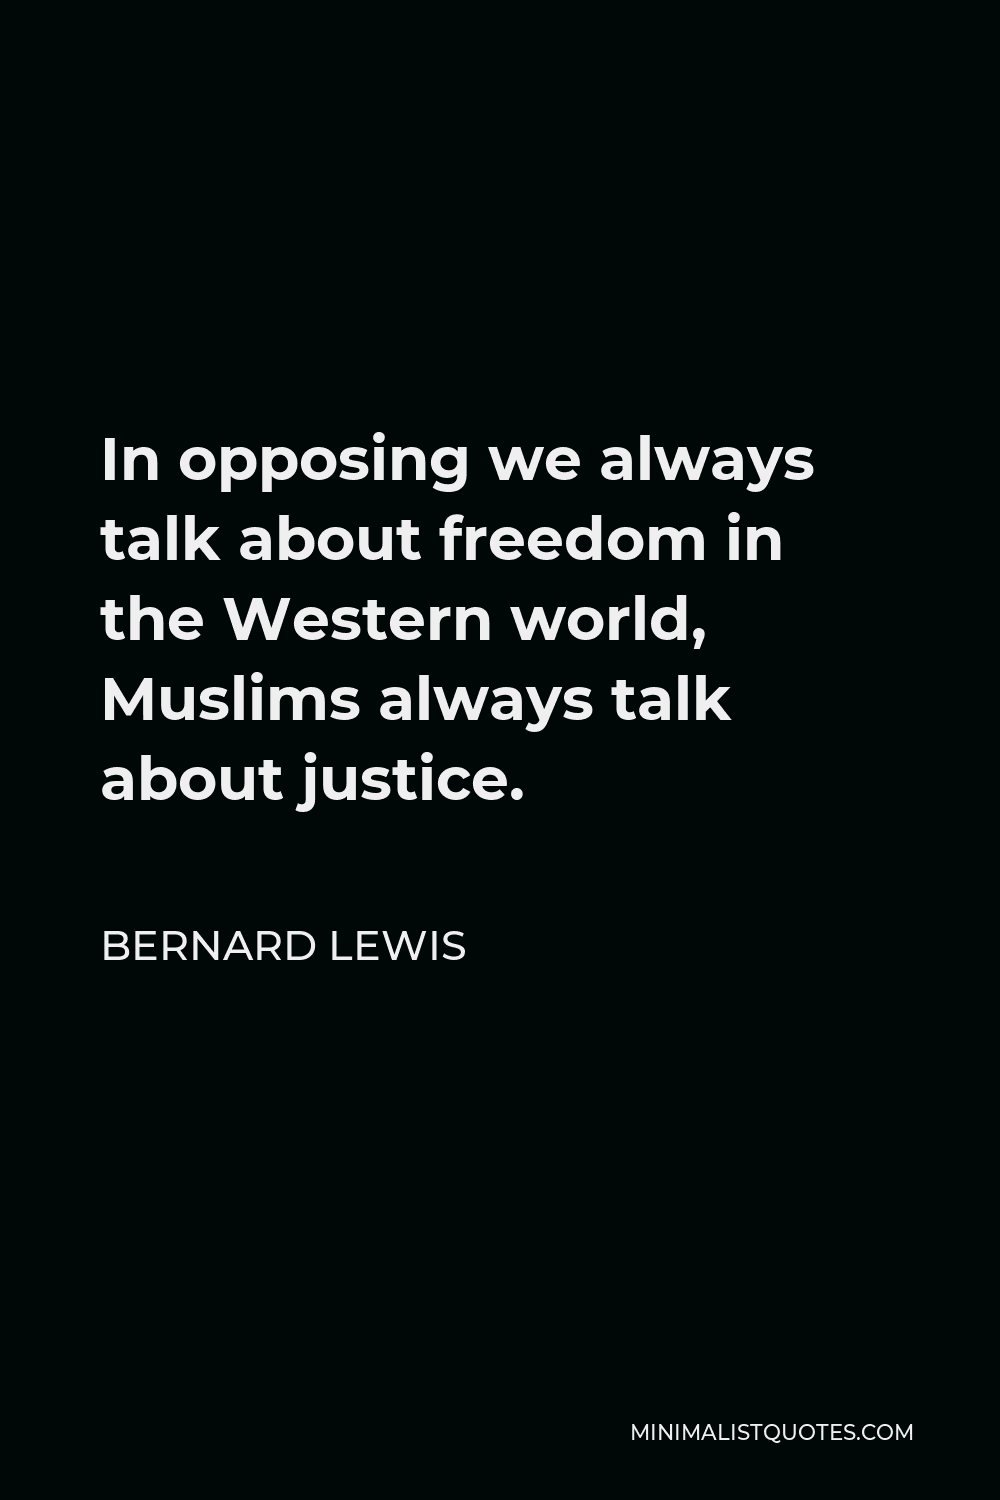 Bernard Lewis Quote - In opposing we always talk about freedom in the Western world, Muslims always talk about justice.